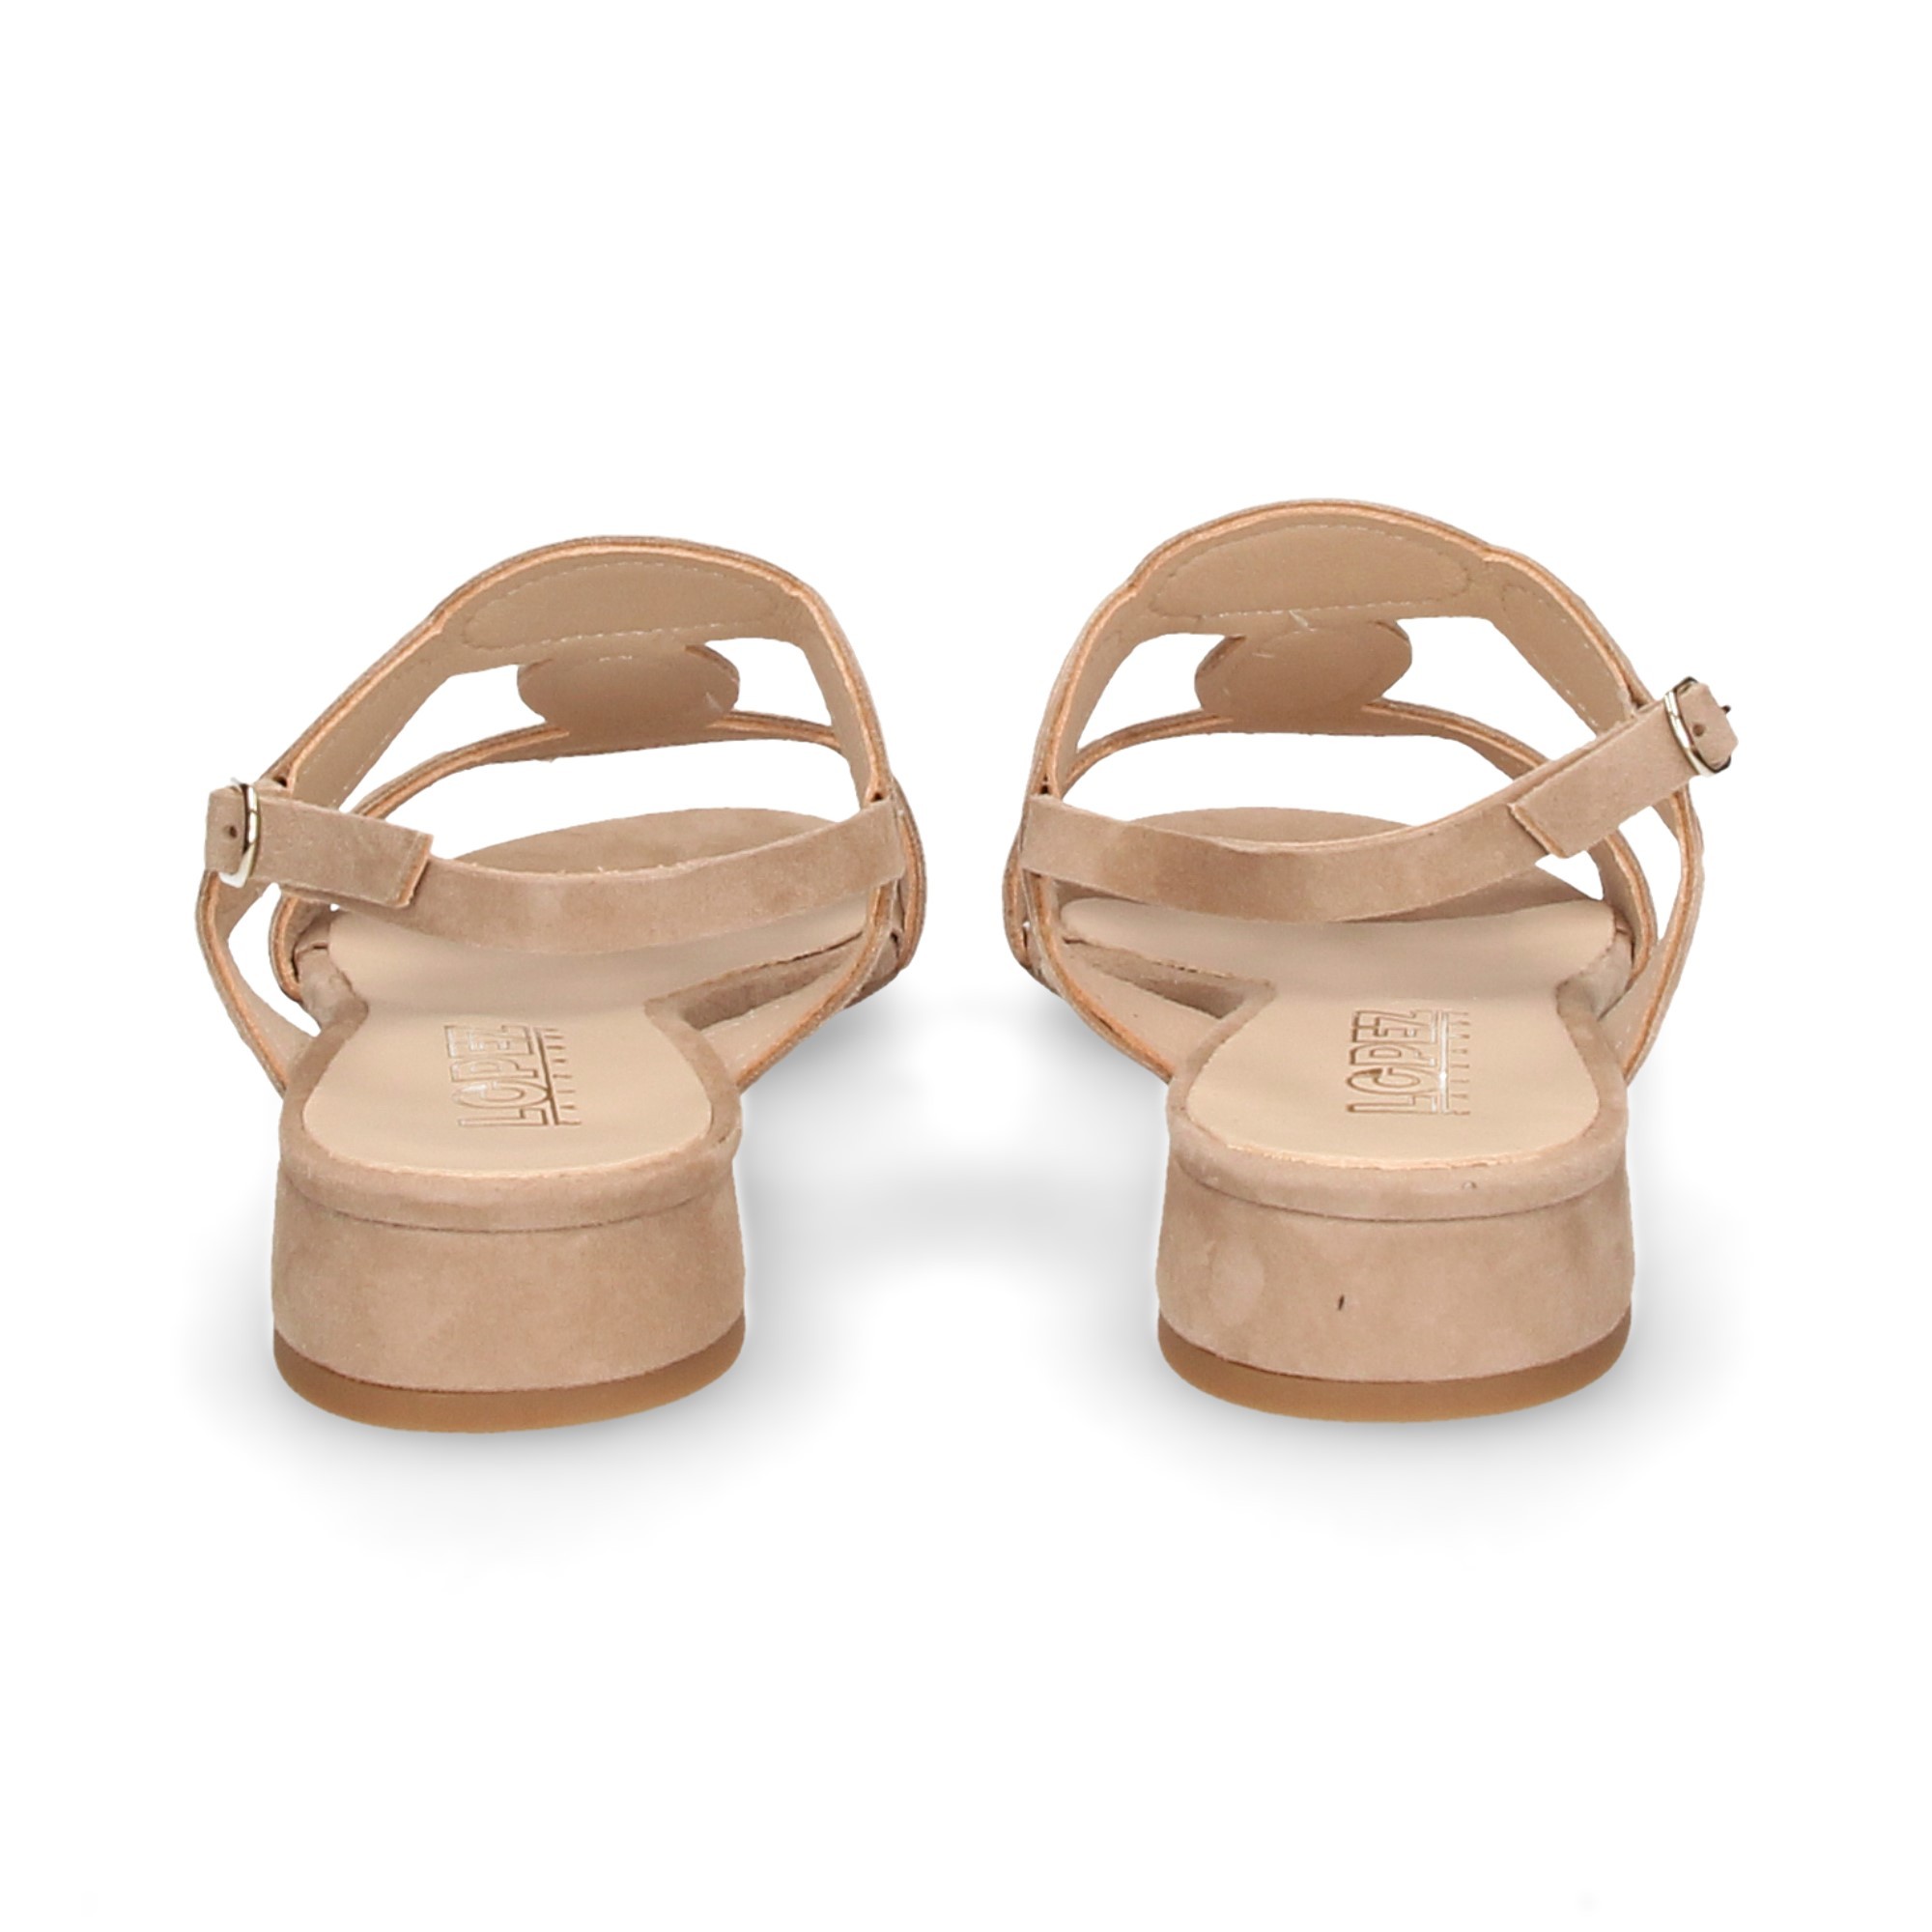 sandal-tied-oval-topos-ante-nude